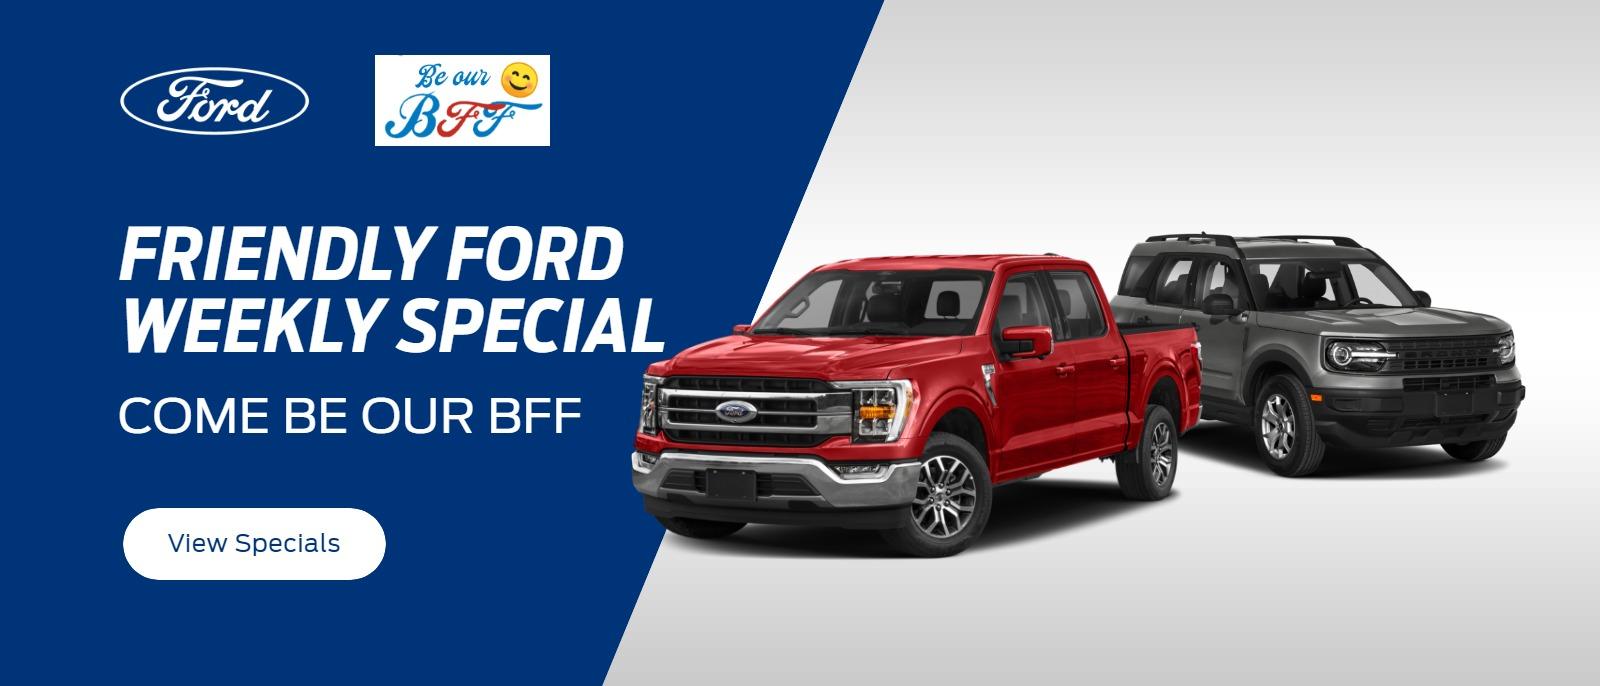 "Friendly Ford Weekly Special"
"Come be our BFF"